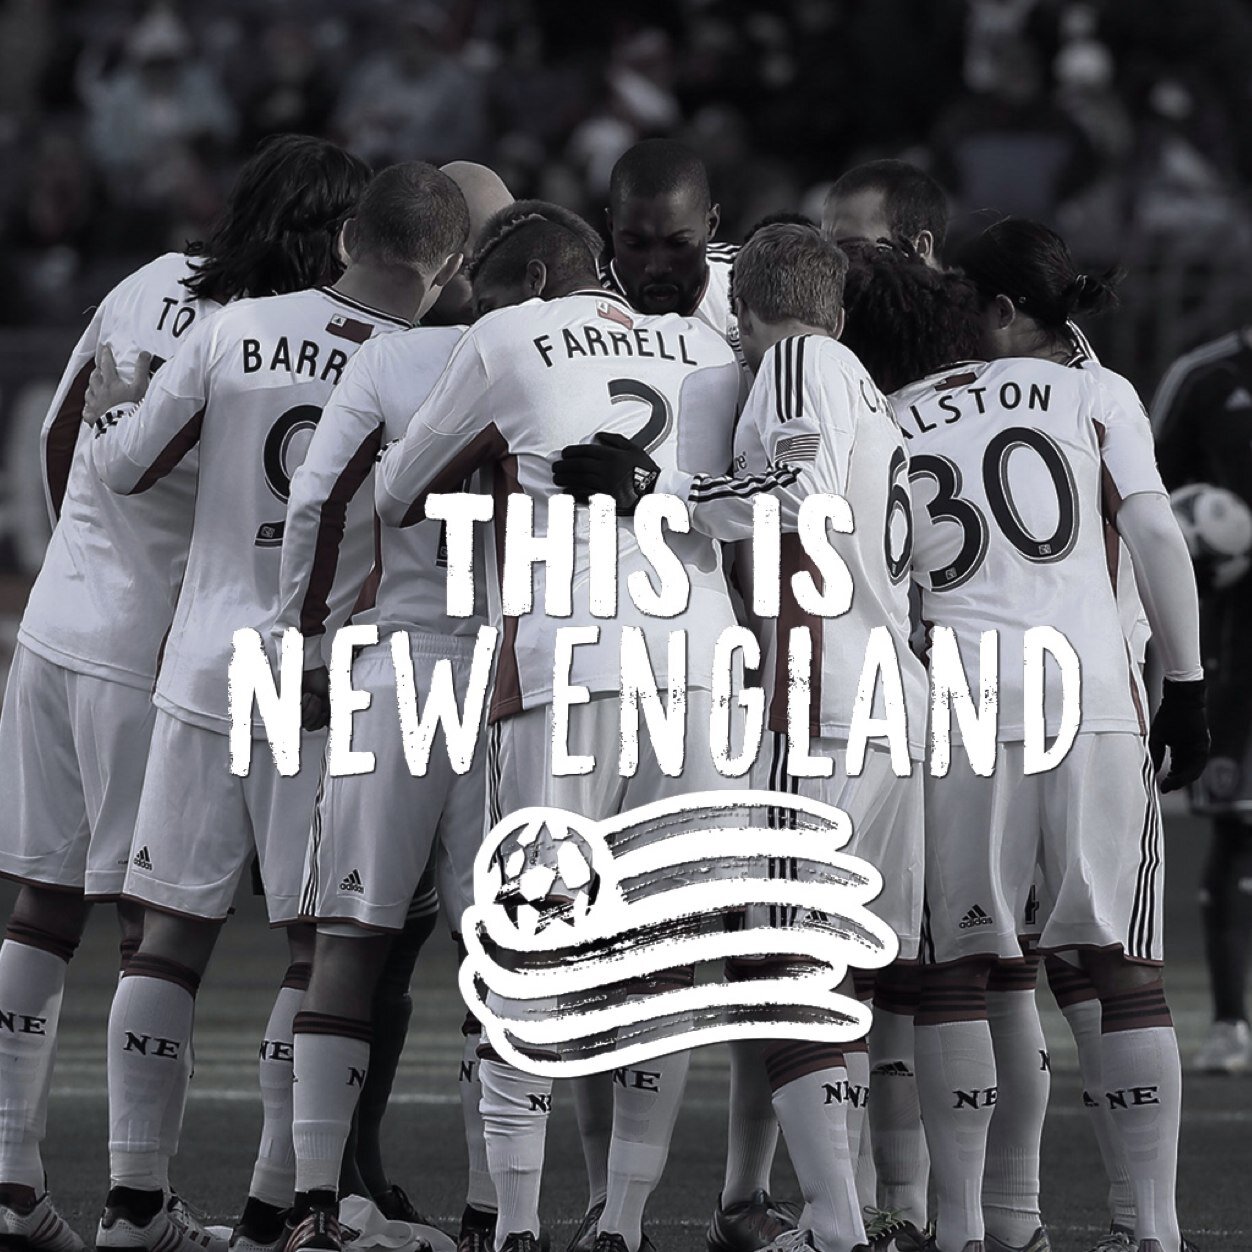 NERevs, Portugal, and USMNT. Will likely tweet opinions on the Revs and Christopher Nolan movies.